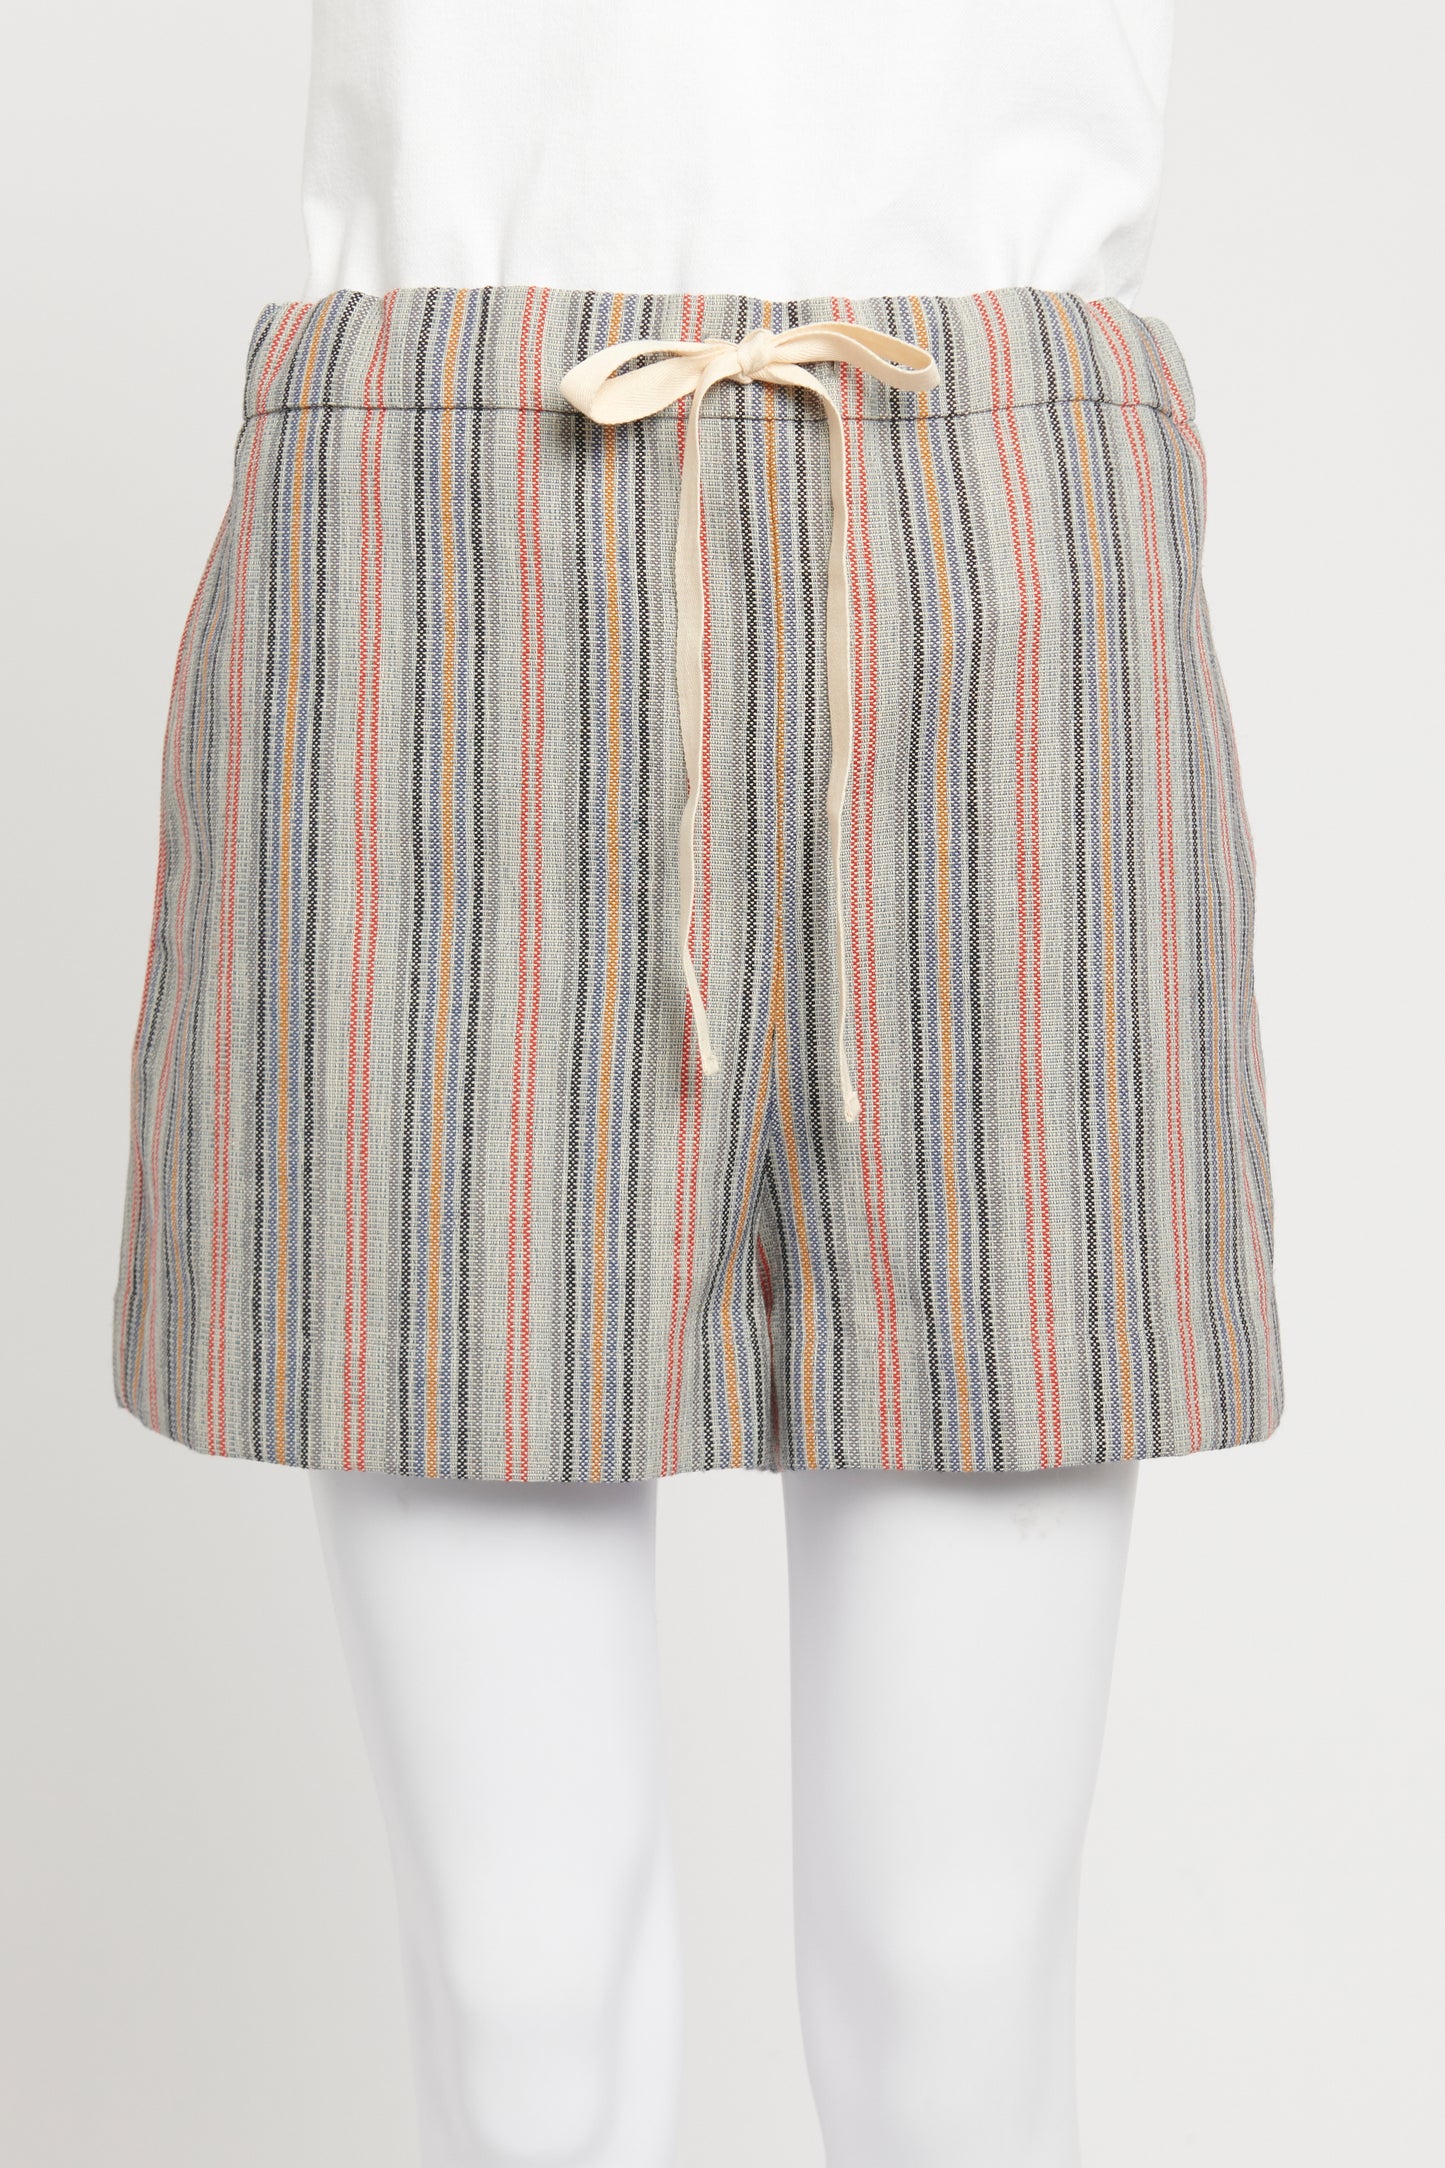 Multi and Grey Striped Wool Preowned Shorts